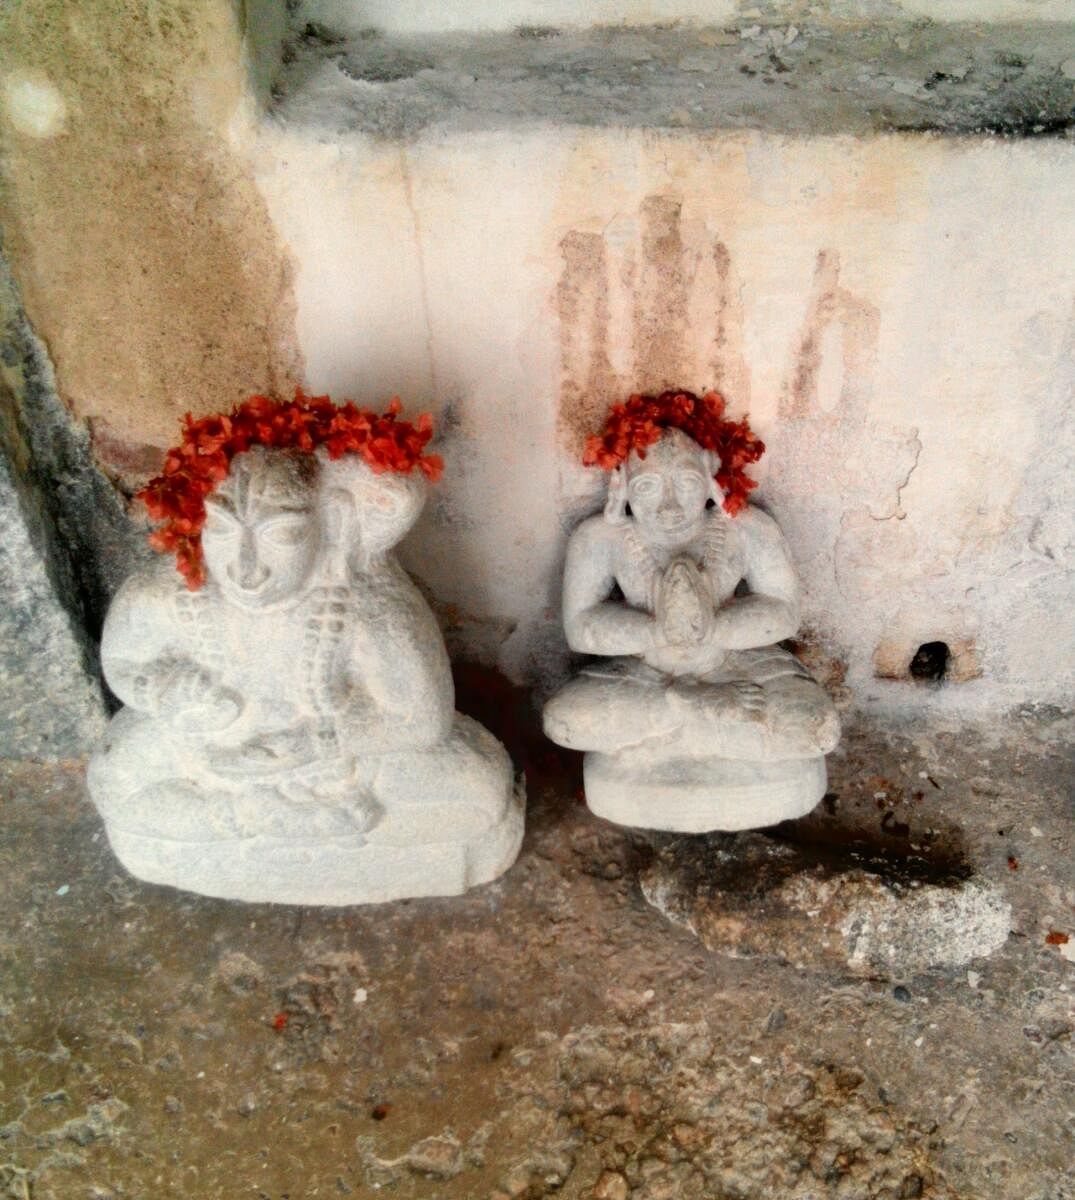 Idols within the temple.